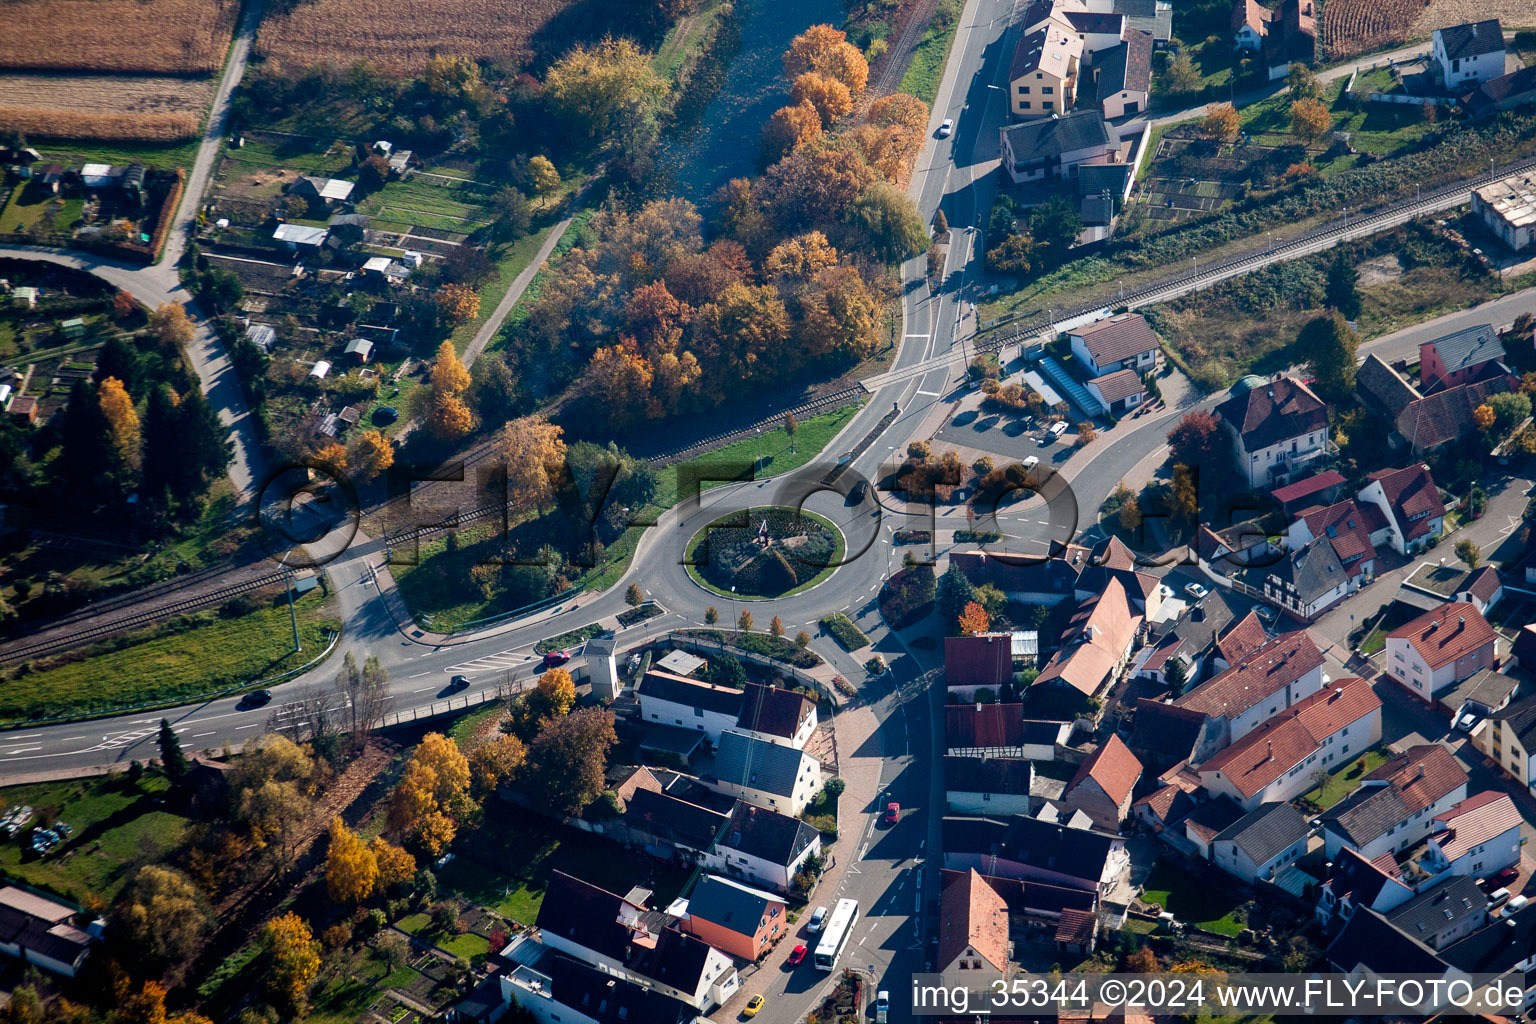 Roundabout towards Wörth in Hagenbach in the state Rhineland-Palatinate, Germany